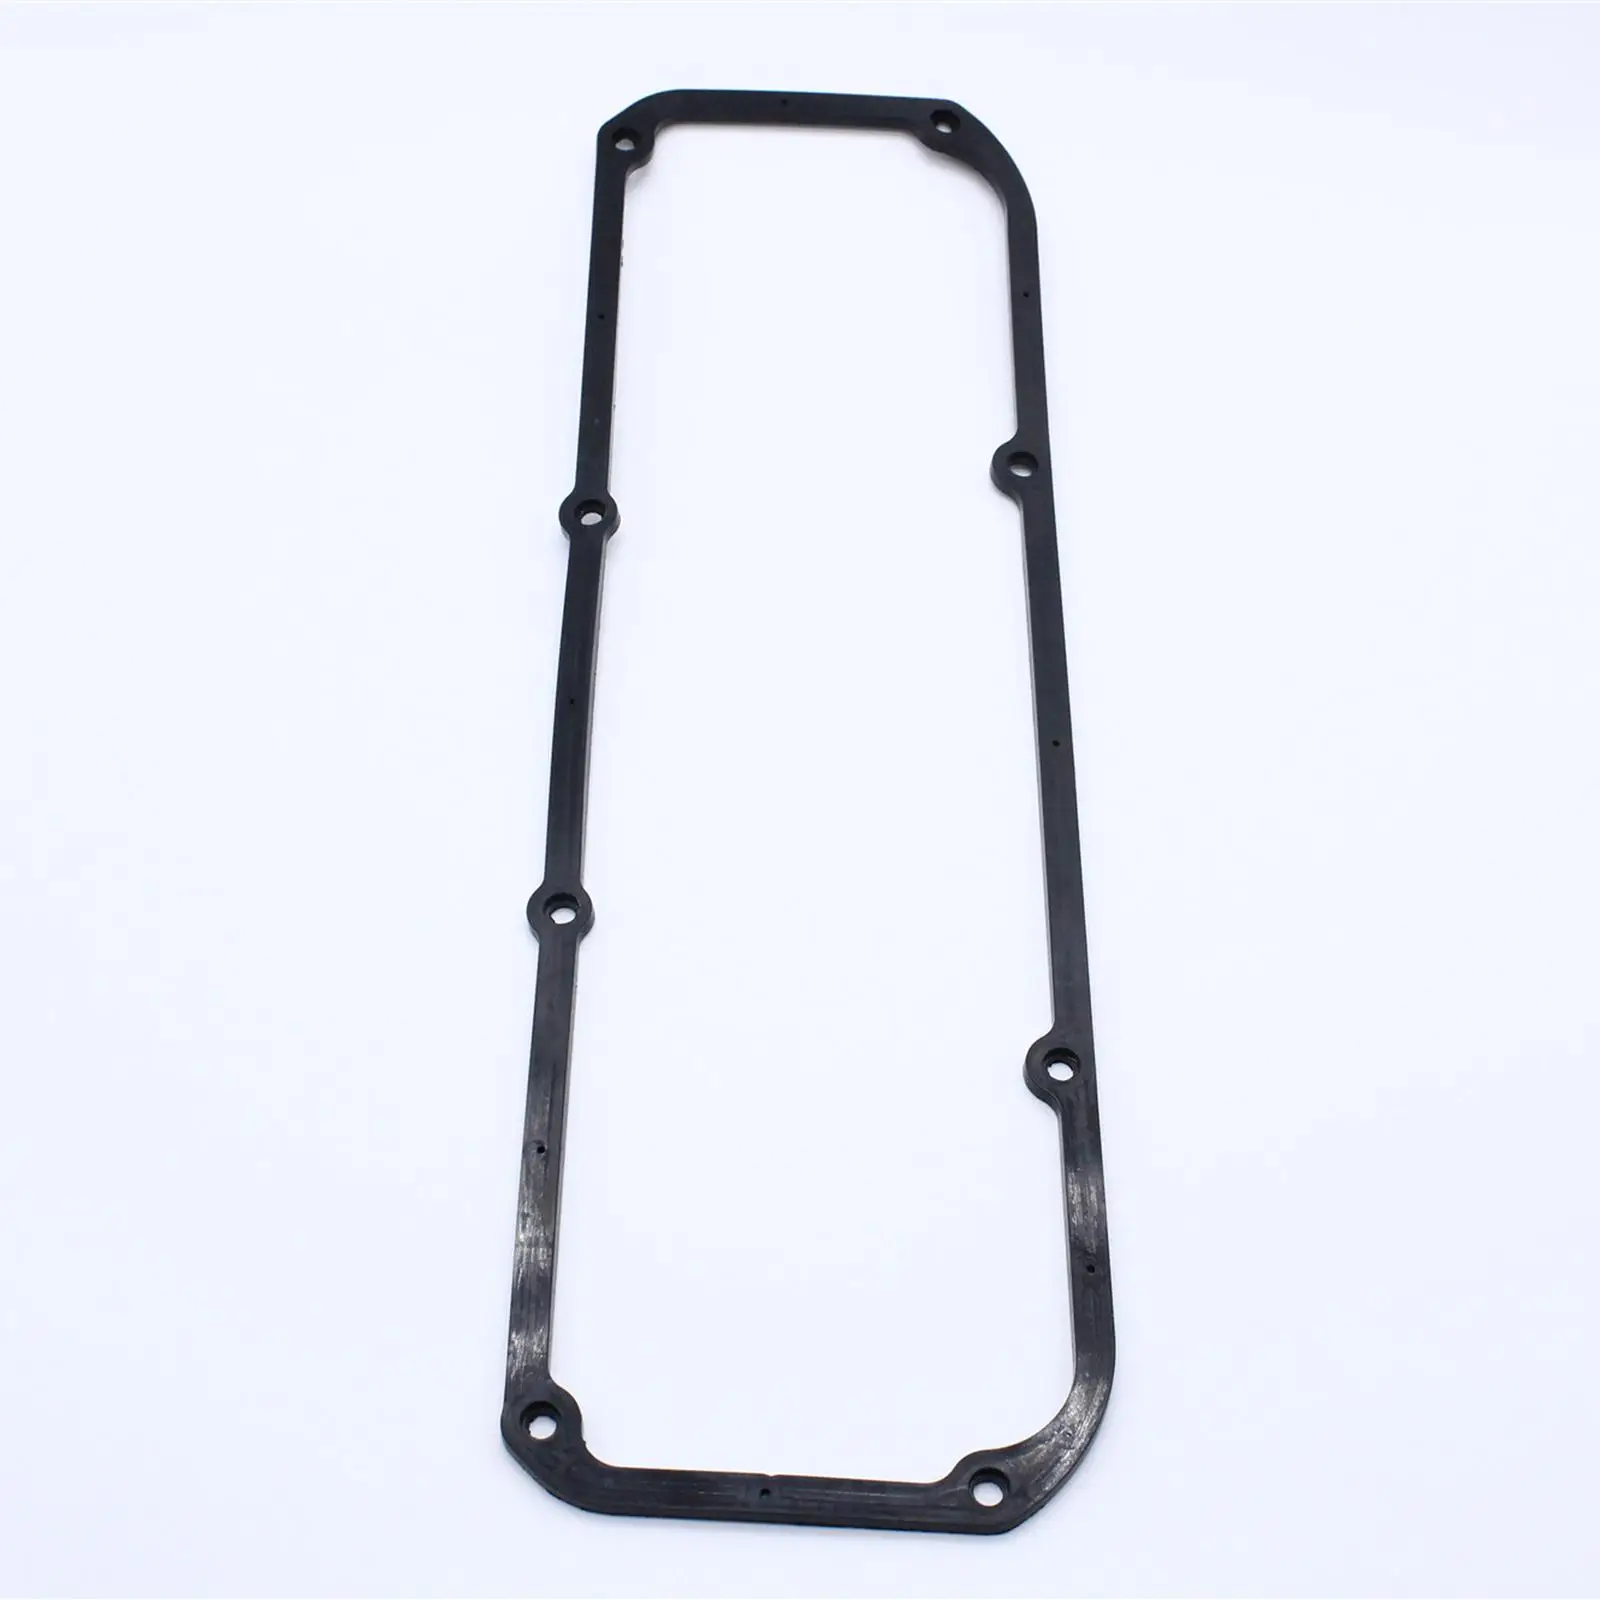 2 Pieces Reusable Cover Gaskets Rubber for 351C Spare Parts